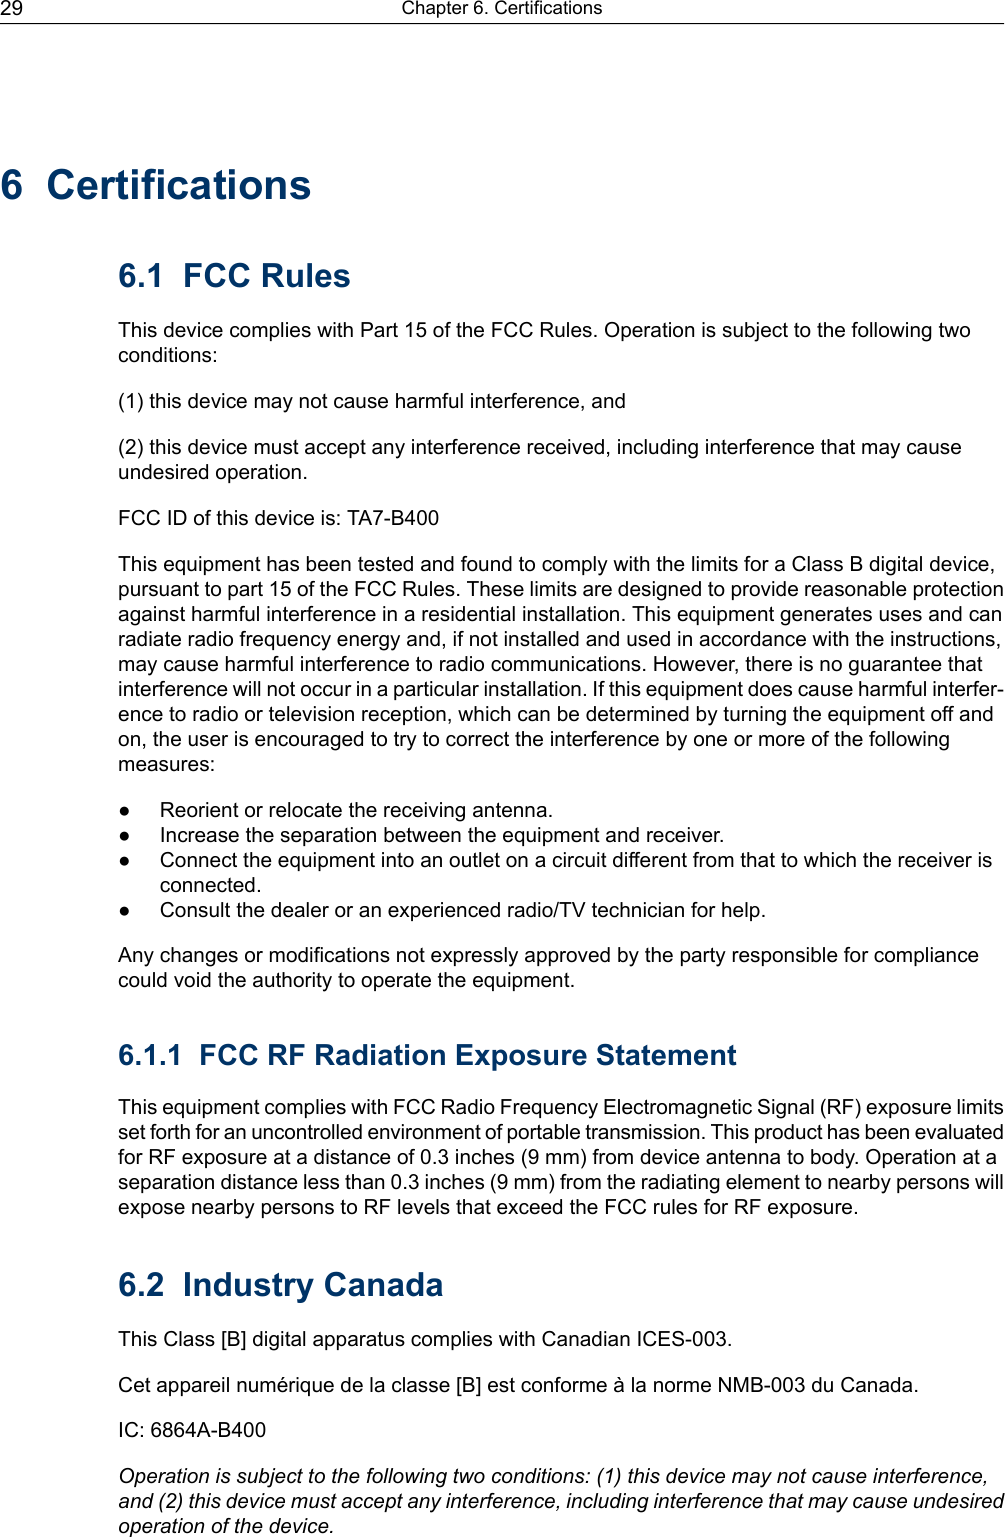 6 Certifications6.1 FCC RulesThis device complies with Part 15 of the FCC Rules. Operation is subject to the following twoconditions:(1) this device may not cause harmful interference, and(2) this device must accept any interference received, including interference that may causeundesired operation.FCC ID of this device is: TA7-B400This equipment has been tested and found to comply with the limits for a Class B digital device,pursuant to part 15 of the FCC Rules. These limits are designed to provide reasonable protectionagainst harmful interference in a residential installation. This equipment generates uses and canradiate radio frequency energy and, if not installed and used in accordance with the instructions,may cause harmful interference to radio communications. However, there is no guarantee thatinterference will not occur in a particular installation. If this equipment does cause harmful interfer-ence to radio or television reception, which can be determined by turning the equipment off andon, the user is encouraged to try to correct the interference by one or more of the followingmeasures:● Reorient or relocate the receiving antenna.● Increase the separation between the equipment and receiver.● Connect the equipment into an outlet on a circuit different from that to which the receiver isconnected.● Consult the dealer or an experienced radio/TV technician for help.Any changes or modifications not expressly approved by the party responsible for compliancecould void the authority to operate the equipment.6.1.1 FCC RF Radiation Exposure StatementThis equipment complies with FCC Radio Frequency Electromagnetic Signal (RF) exposure limitsset forth for an uncontrolled environment of portable transmission. This product has been evaluatedfor RF exposure at a distance of 0.3 inches (9 mm) from device antenna to body. Operation at aseparation distance less than 0.3 inches (9 mm) from the radiating element to nearby persons willexpose nearby persons to RF levels that exceed the FCC rules for RF exposure.6.2 Industry CanadaThis Class [B] digital apparatus complies with Canadian ICES-003.Cet appareil numérique de la classe [B] est conforme à la norme NMB-003 du Canada.IC: 6864A-B400Operation is subject to the following two conditions: (1) this device may not cause interference,and (2) this device must accept any interference, including interference that may cause undesiredoperation of the device.Chapter 6. Certifications29